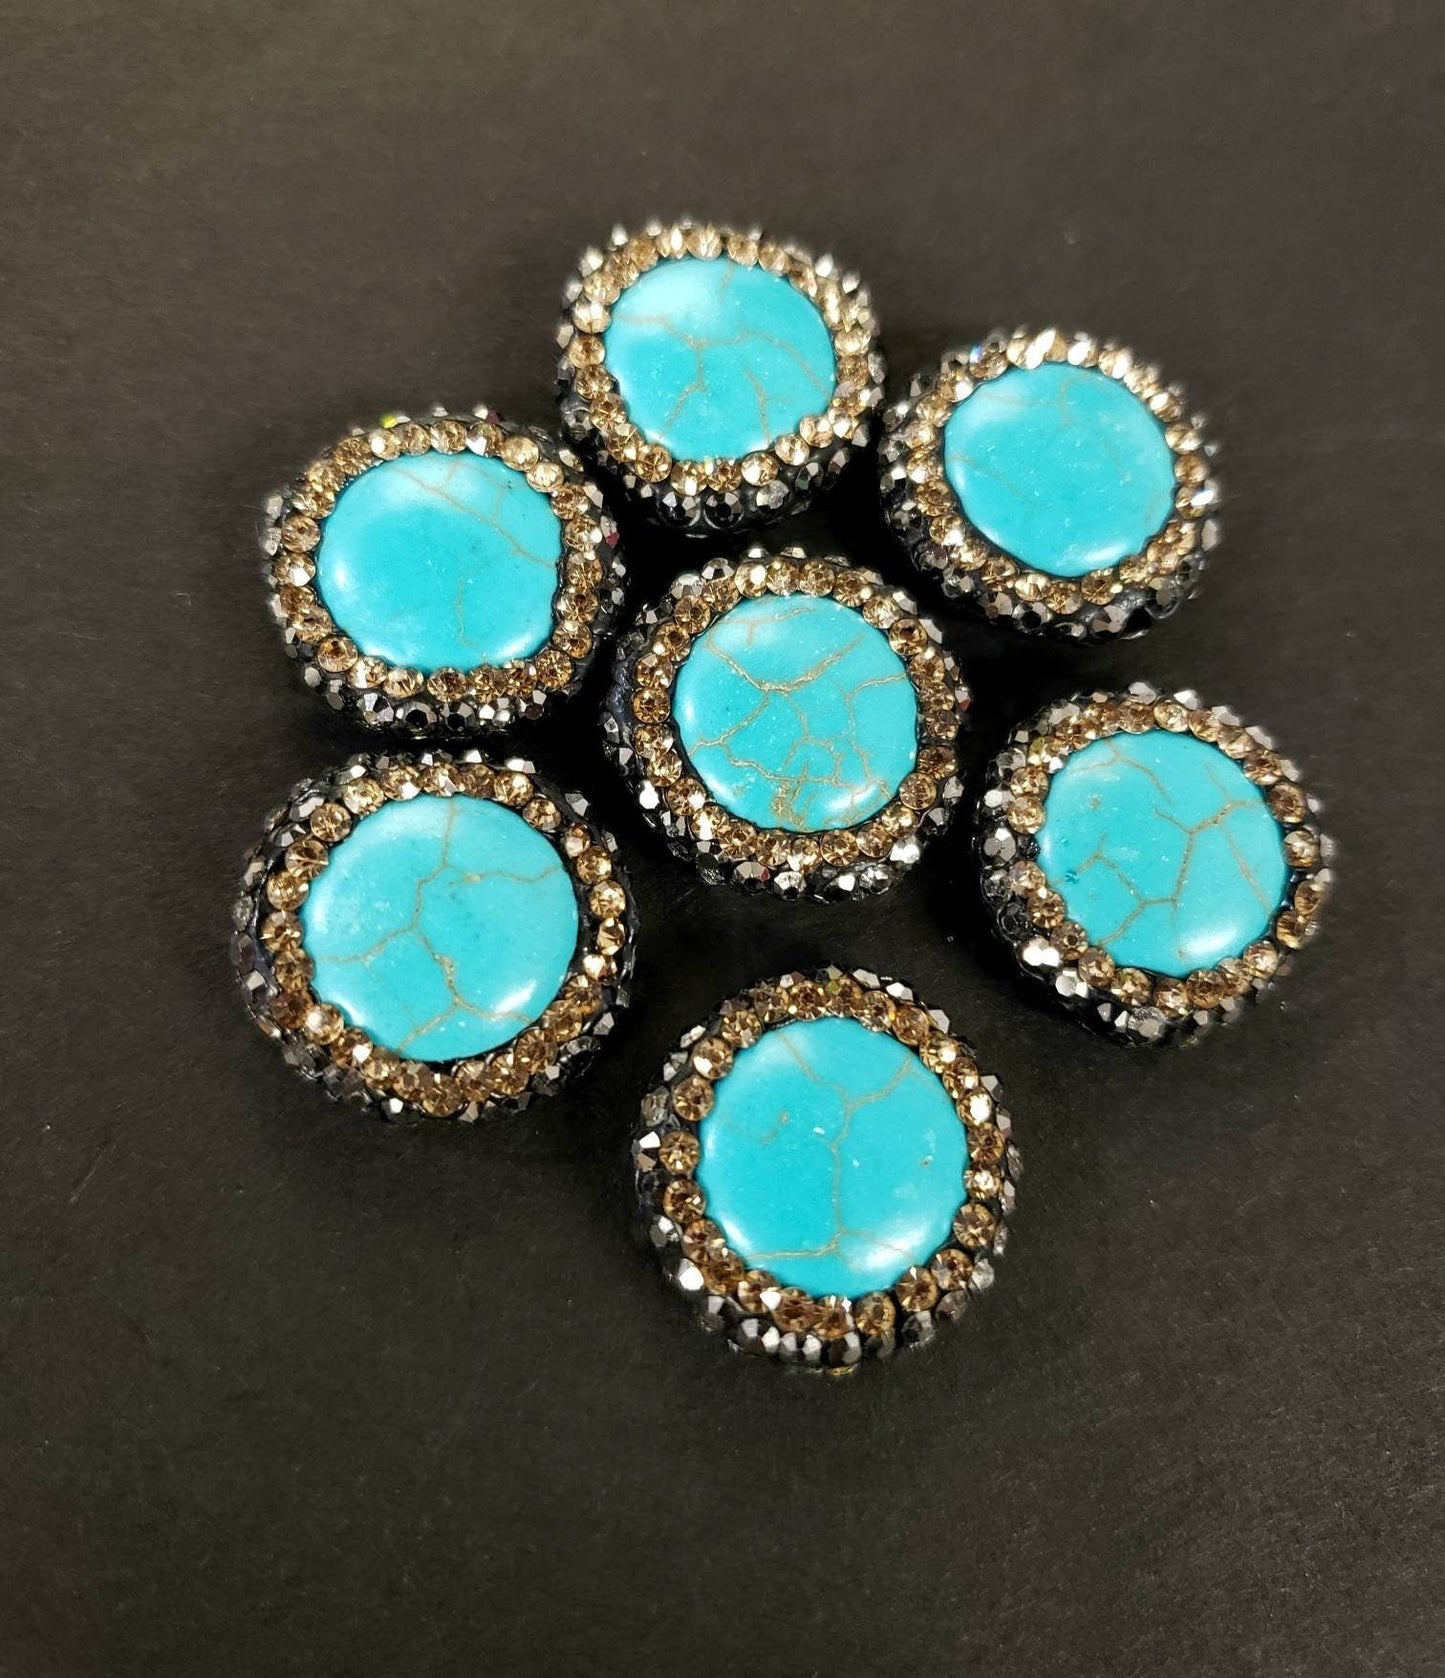 Turquoise rhinestone pave crystal black and gold line bead, center drilled , 17mm sparkly connector, spacer or focal bead.